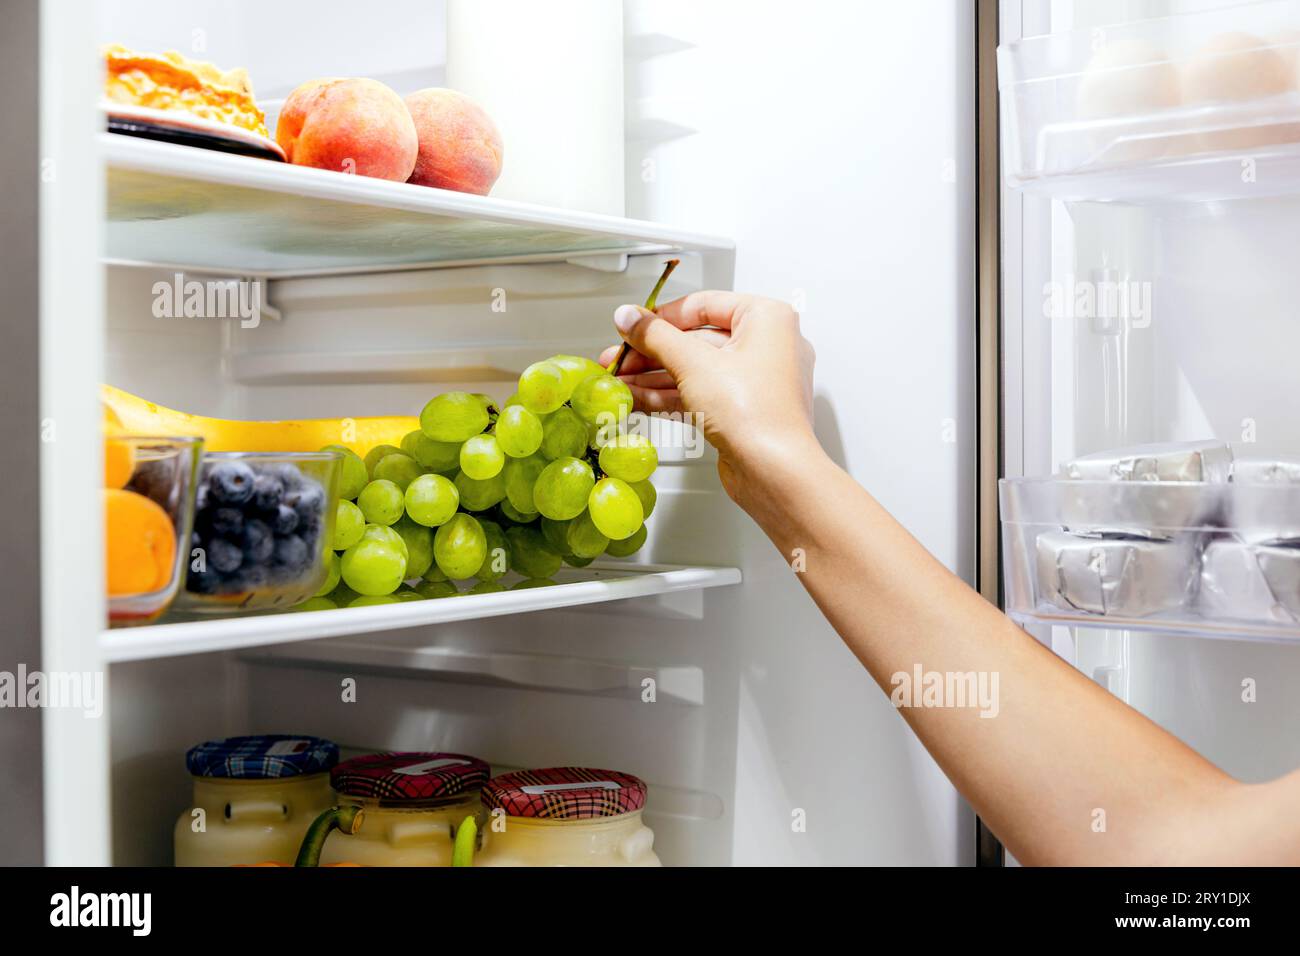 Woman hand taking, grabbing or picks up green bunch of grapes out of open refrigerator shelf or fridge drawer full of fruits, blueberries, bottles wit Stock Photo